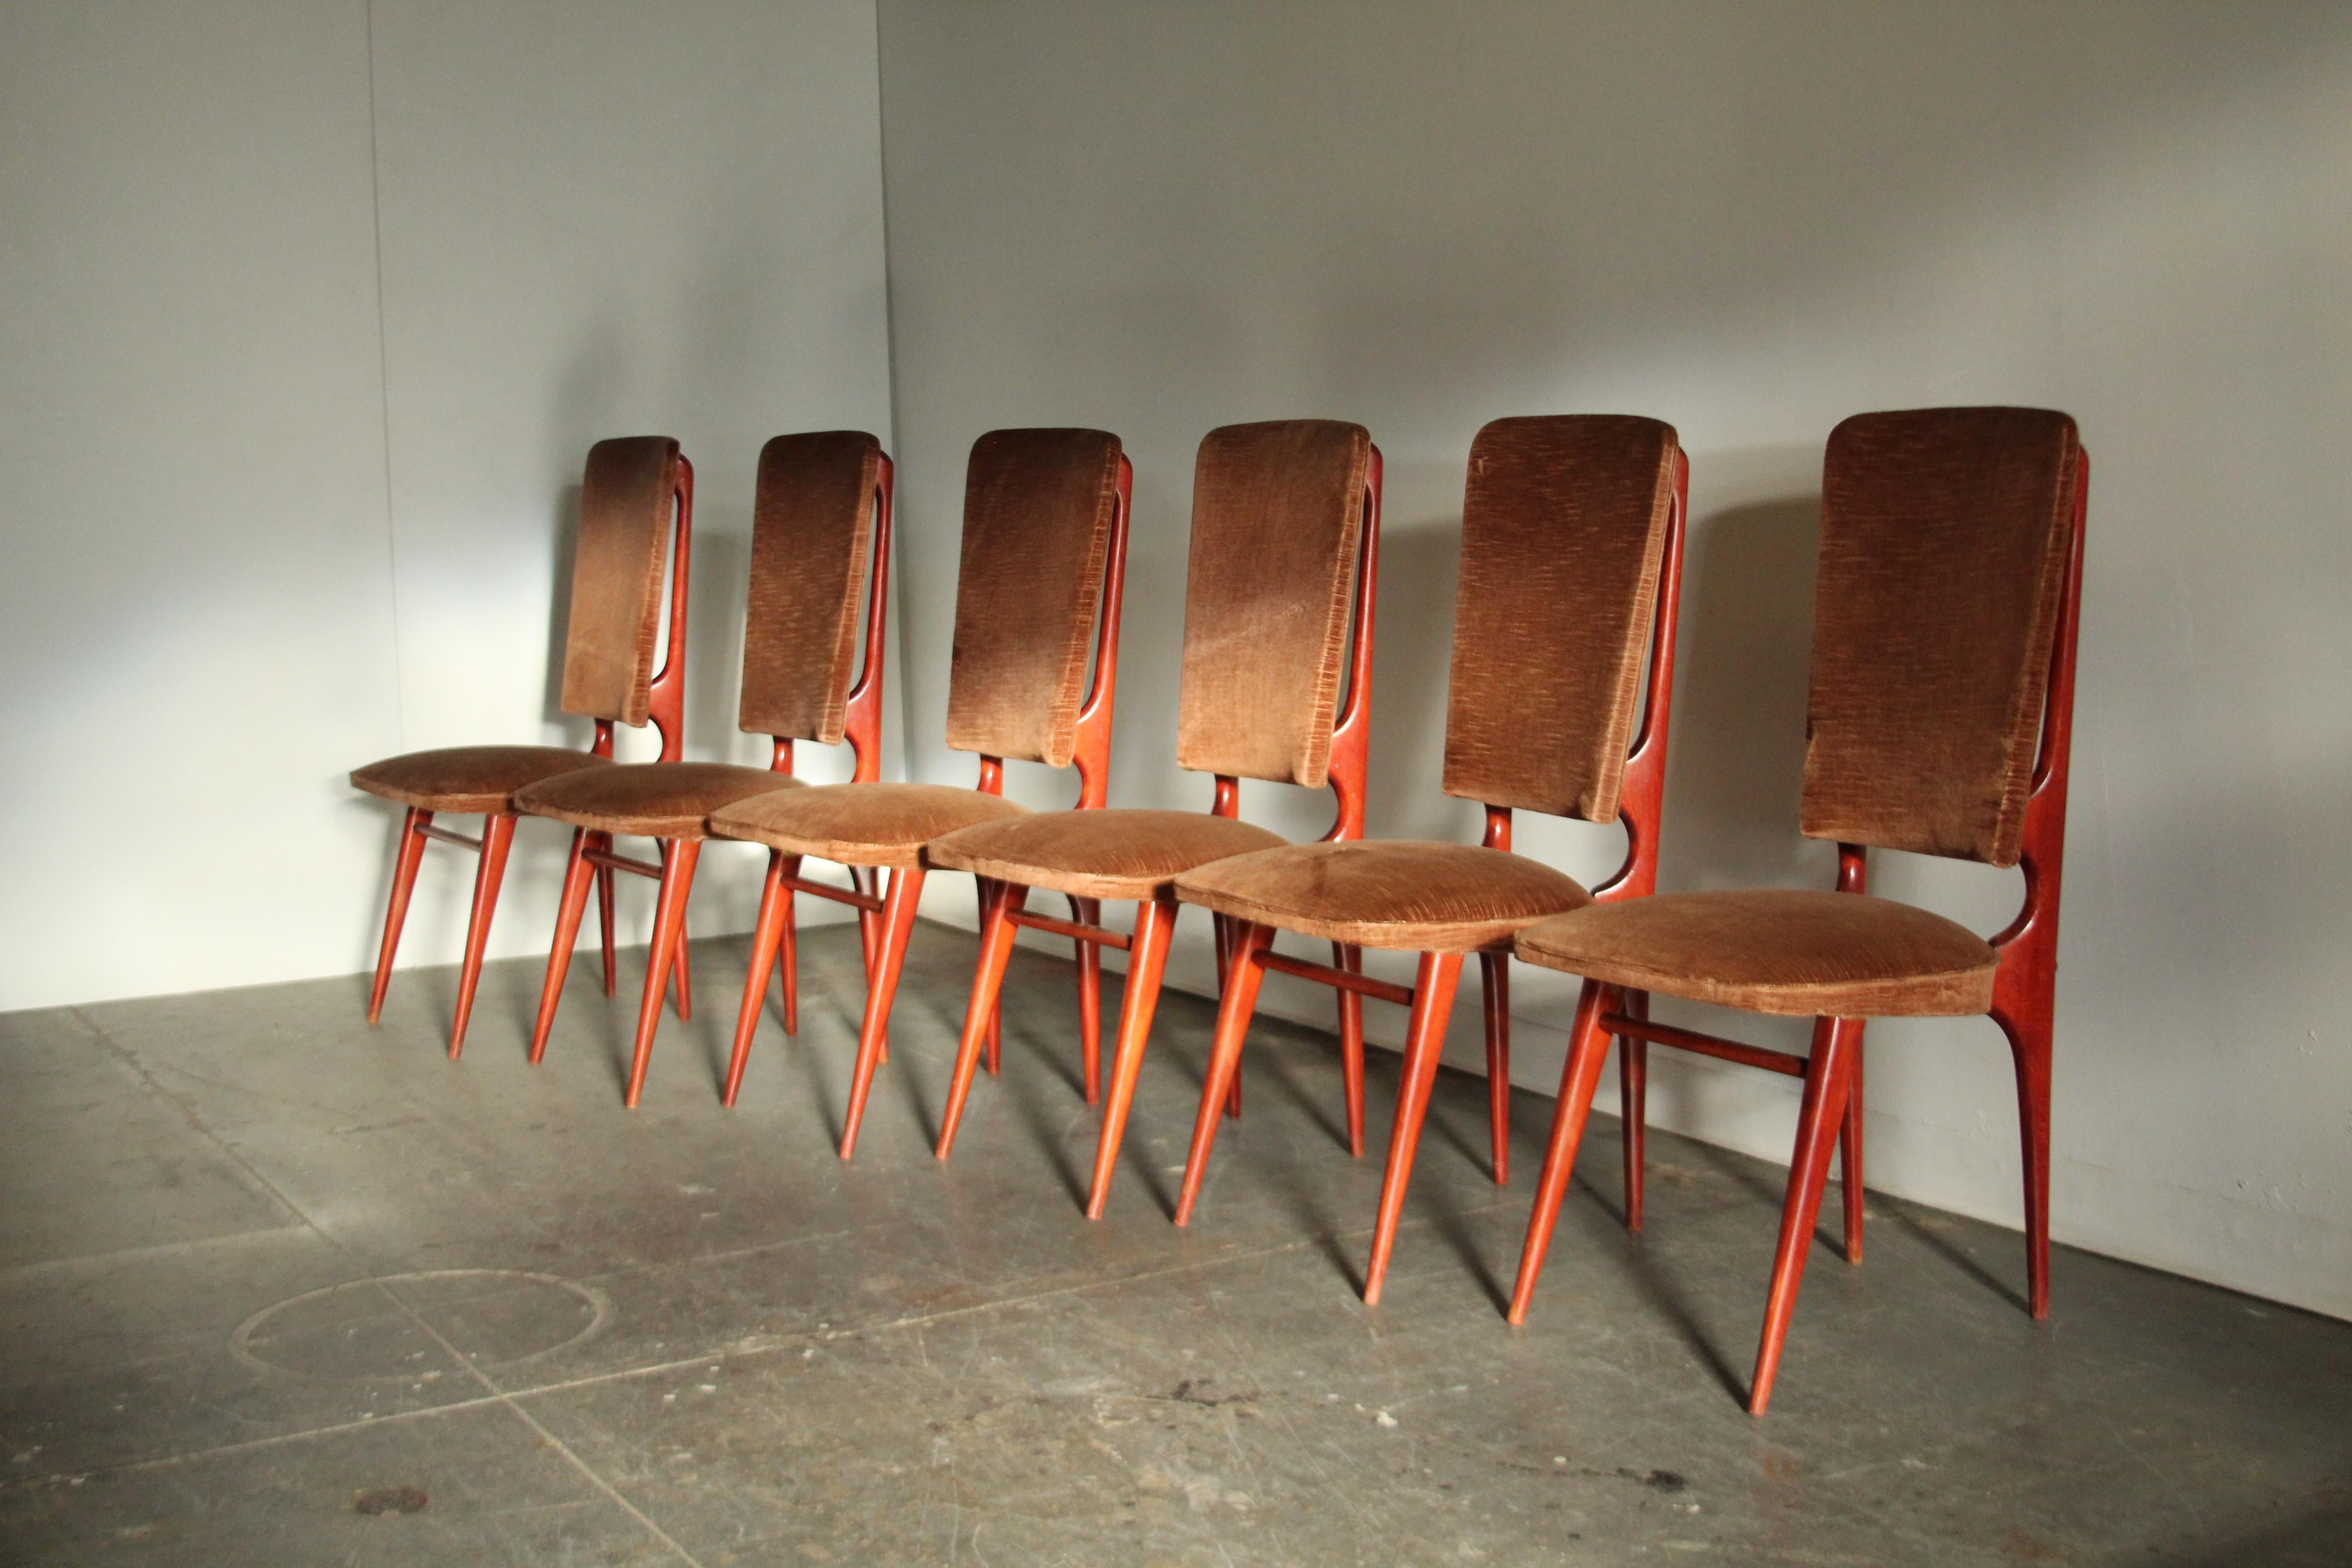 A stunning and uncommon set of 6 French modernist dining chairs produced by Maison Stella in the 1950s. Sleek sculptural frames in aniline dyed beech. Original brown velvet upholstery. Elegant, sculpted form from every angle. This set is in its